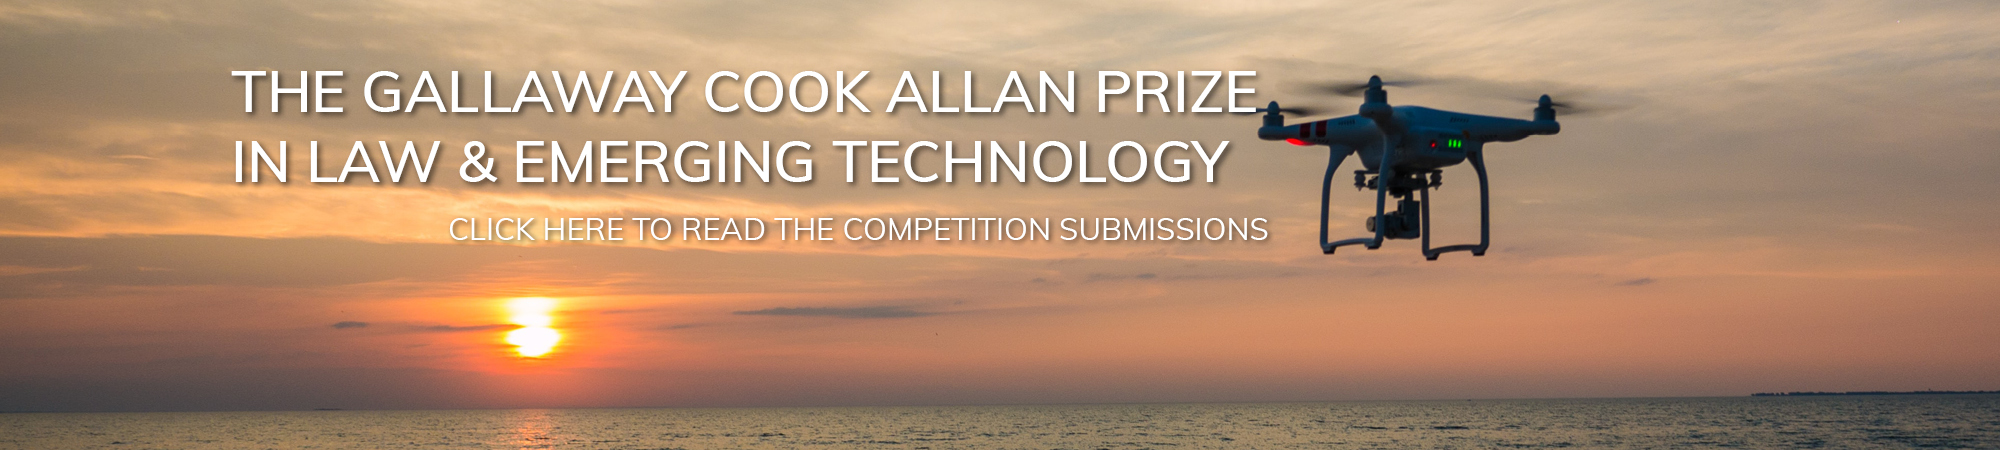 The Gallaway Cook Allan prize in Law and emerging technology, read submissions here